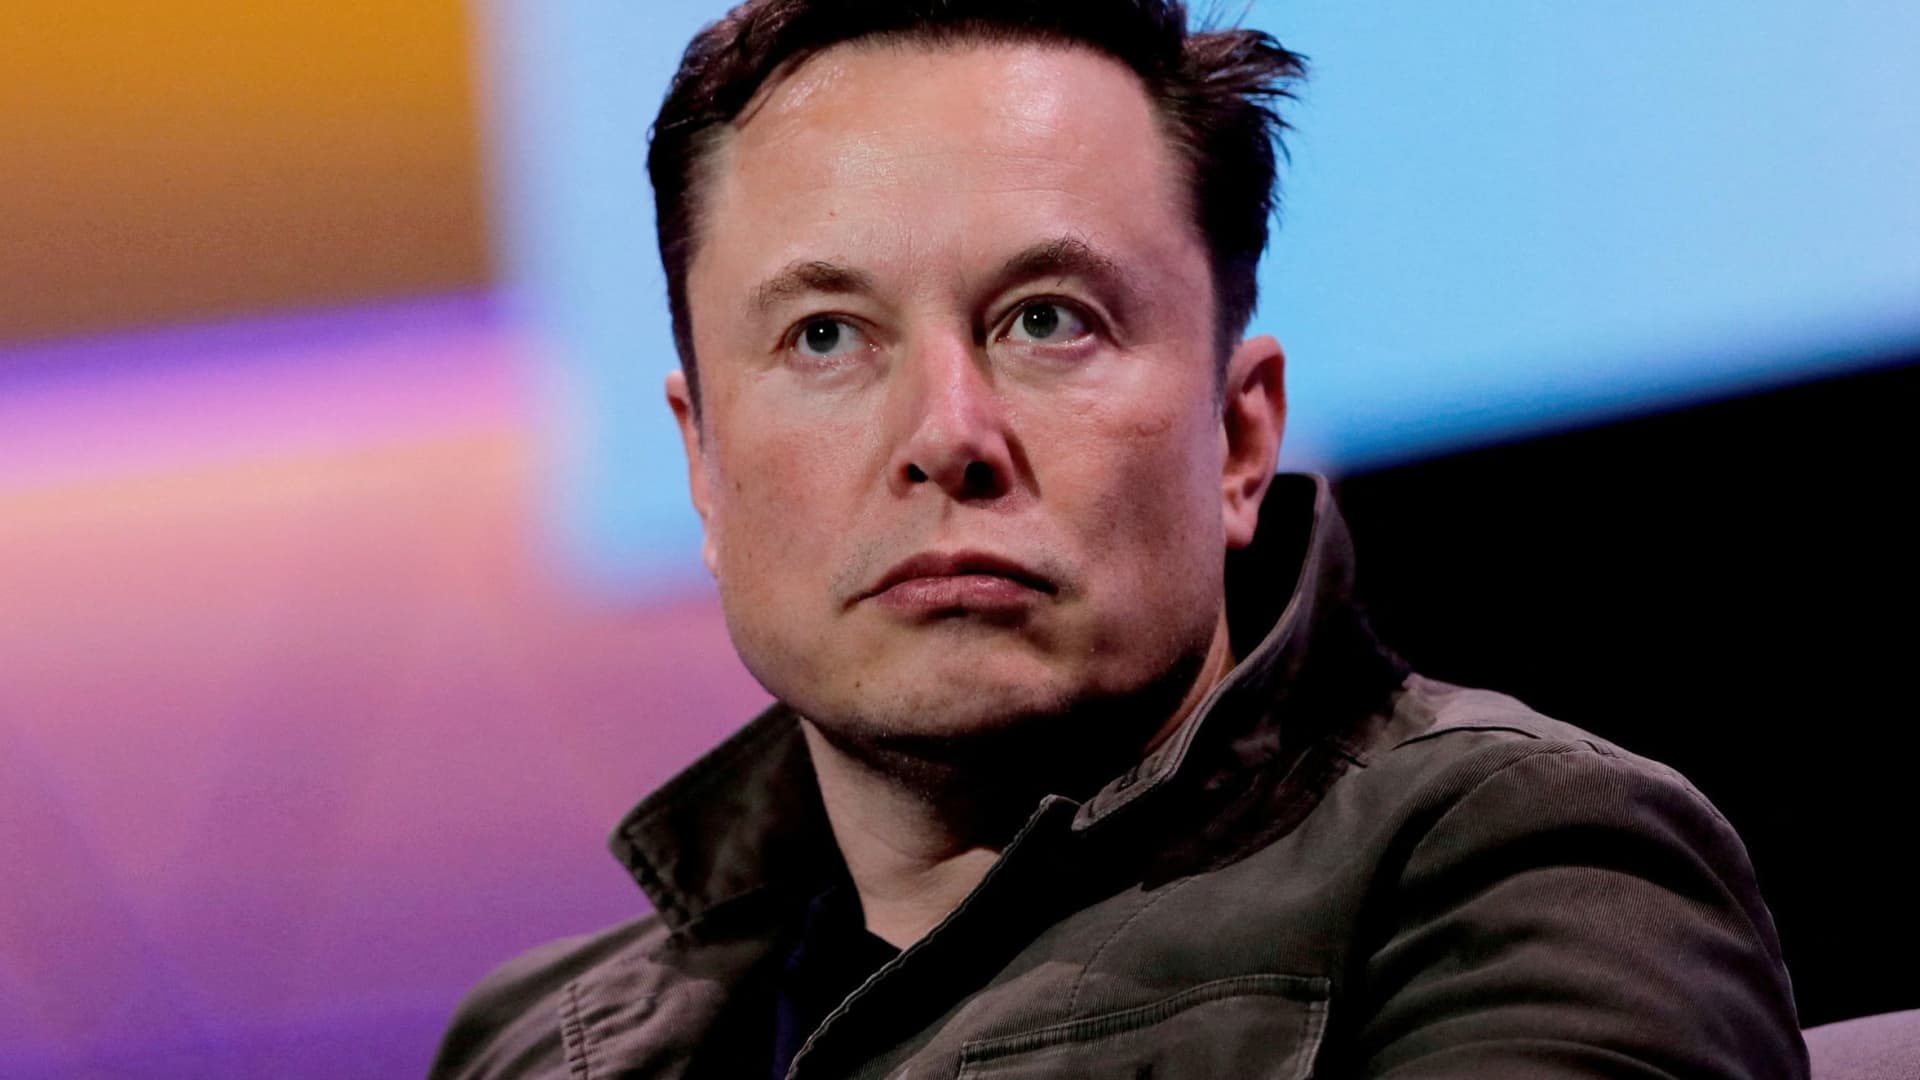 SpaceX owner and Tesla CEO Elon Musk speaks in an interview with legendary game designer Todd Howard (not pictured) at the E3 gaming convention in Los Angeles, California, on June 13, 2019.